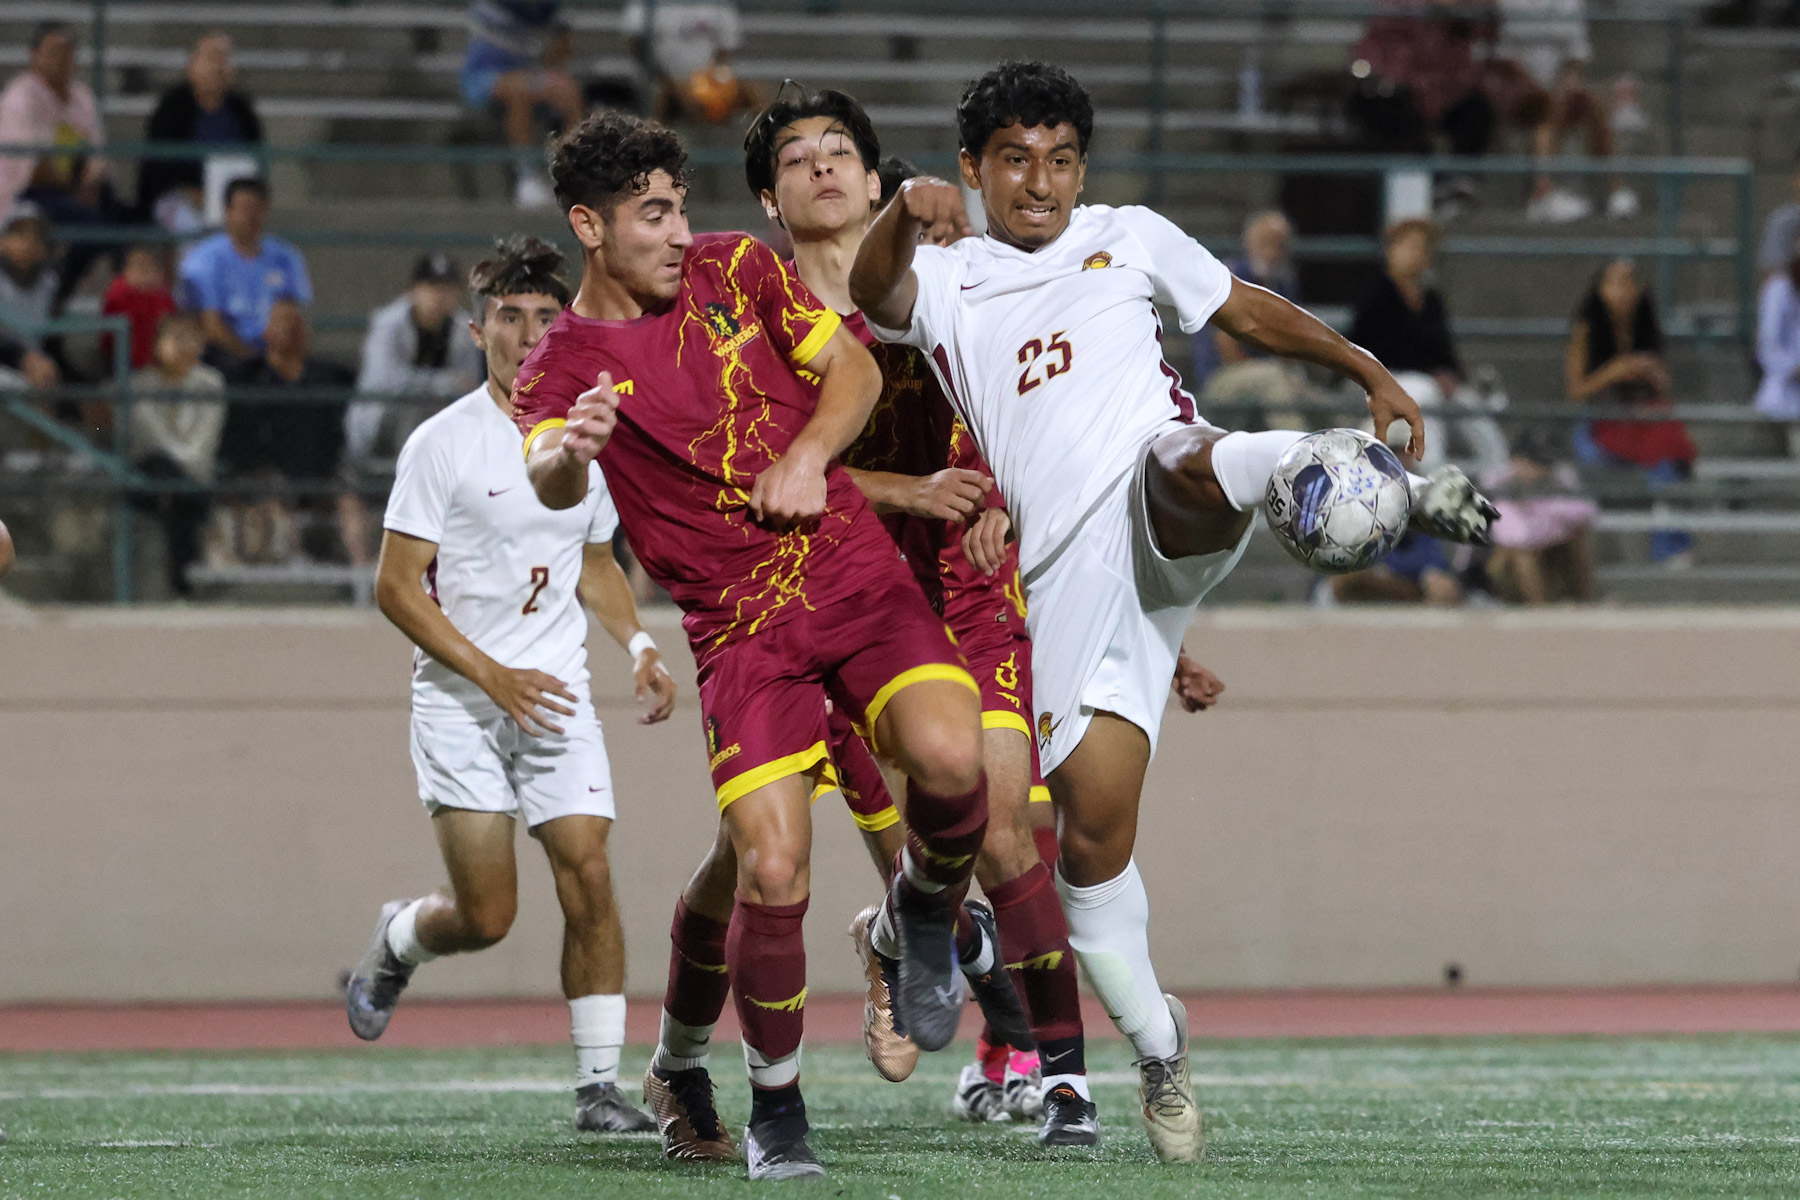 Emiliano Escobar fights for the ball during PCC's tie at Glendale Tuesday night (photo by Richard Quinton).